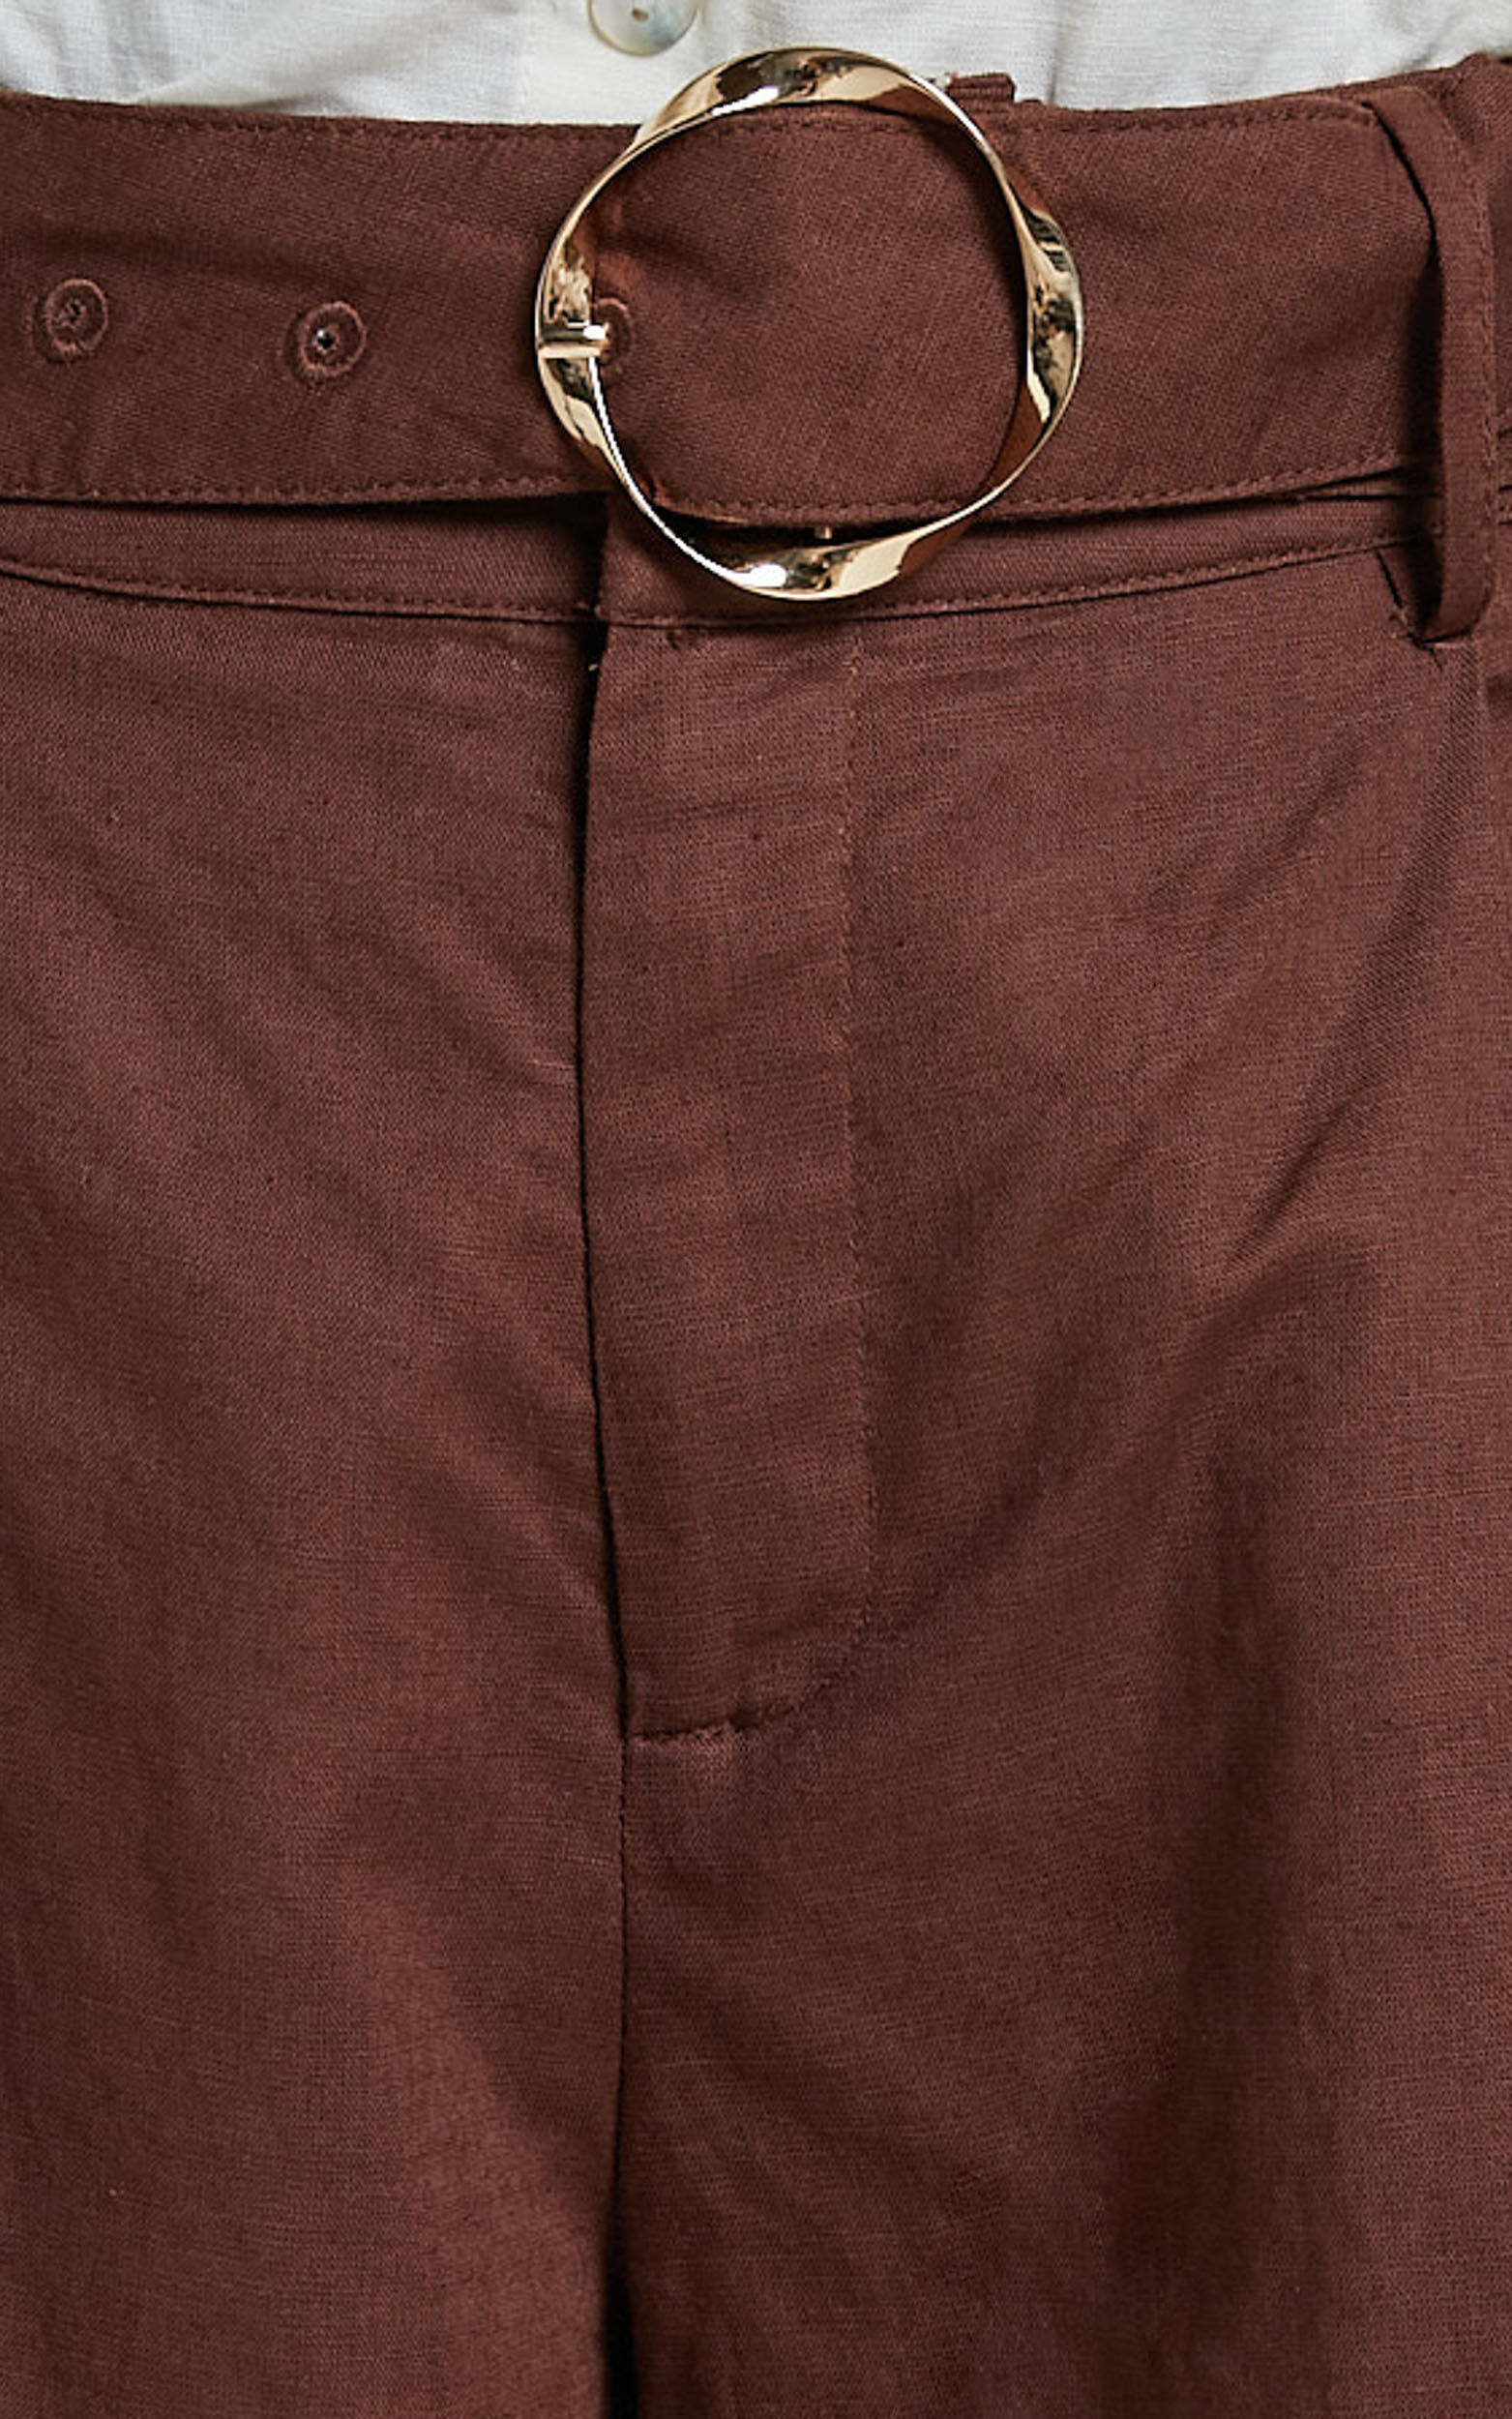 MATE the Label 100% Linen Ruby Shorts in Sedona Brown Size Small